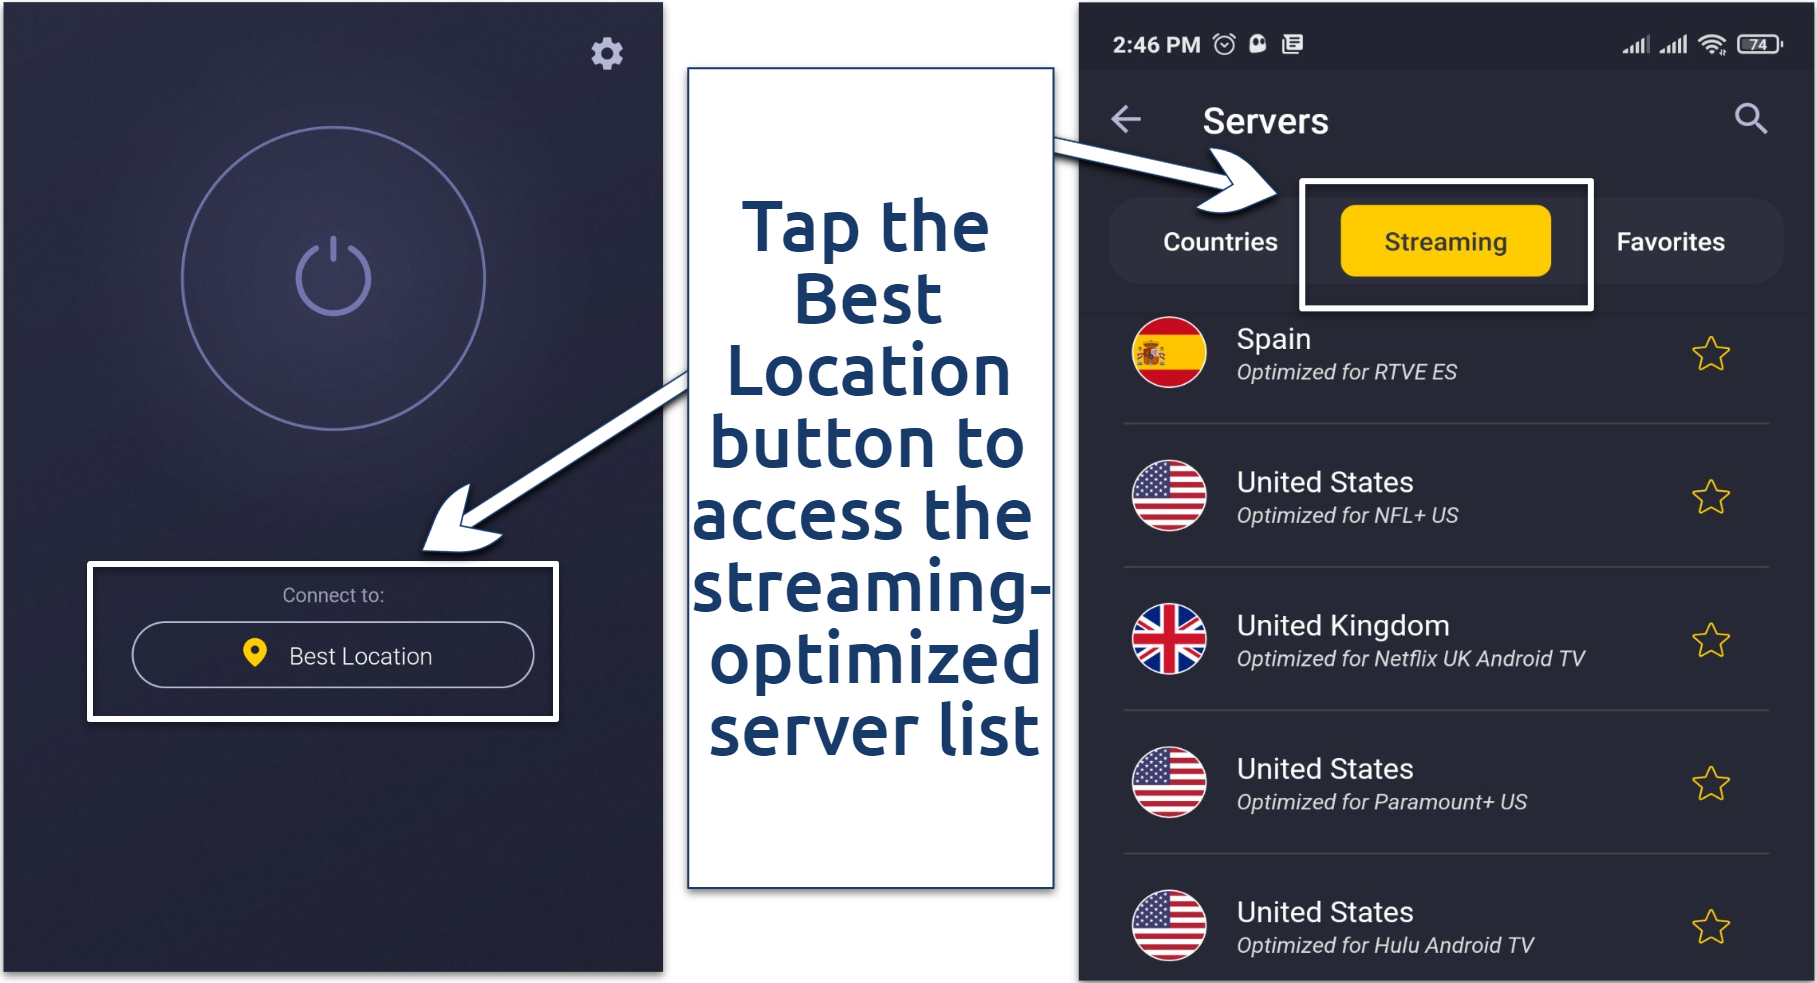 Screenshots of the CyberGhost app showing streaming-optimized servers